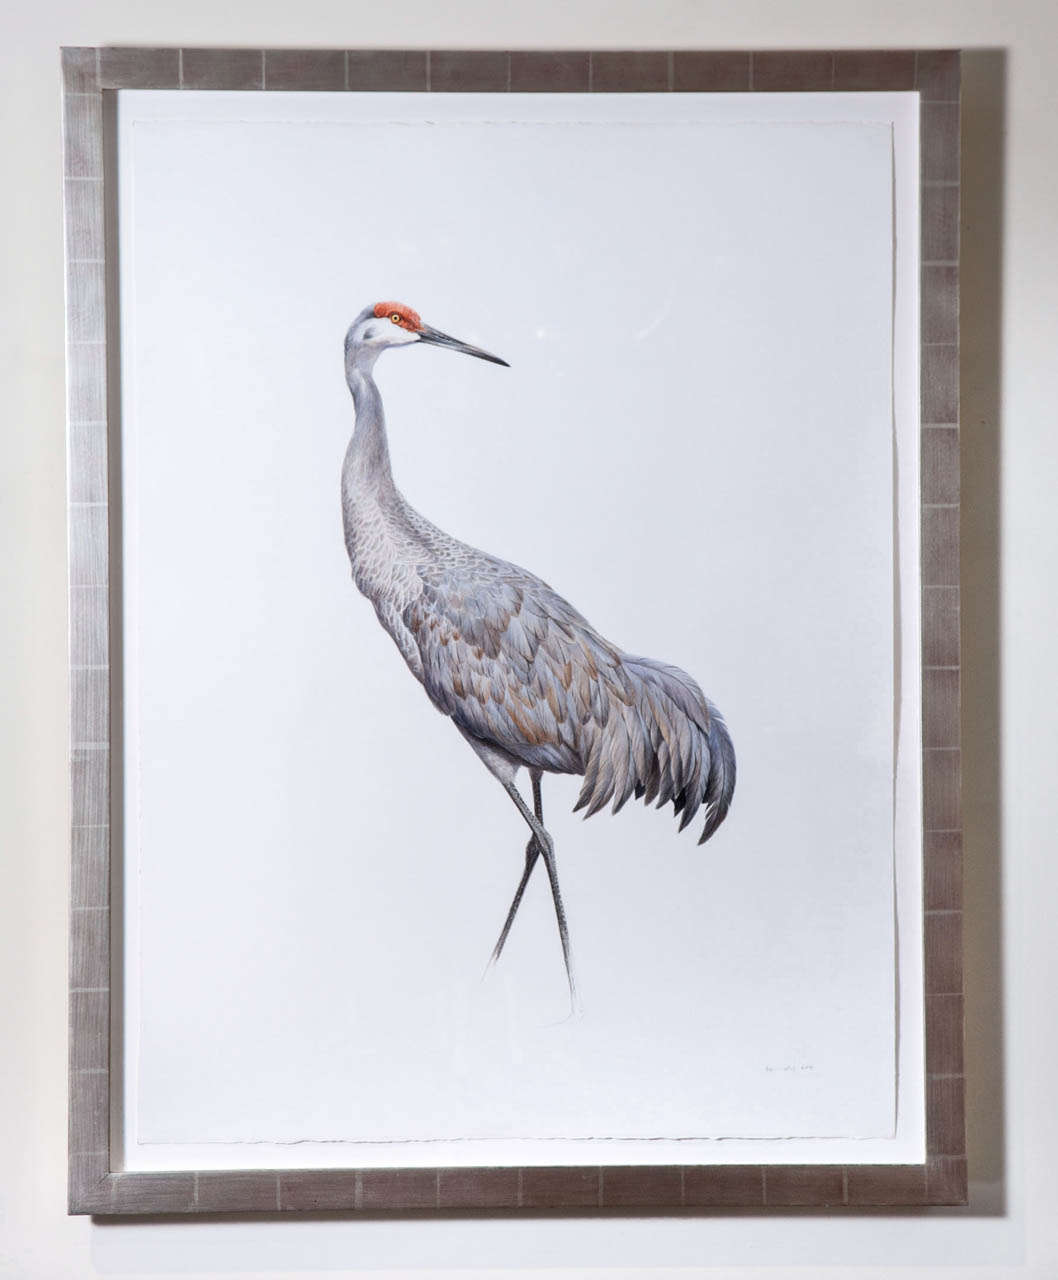 Tony Henneberg - signed 2011

A graceful watercolor of a crane. Float framed in a gilded white gold frame.

Paper Size:  40in. x 30in.

Anthony Henneberg works in watercolors, oil, casein, egg tempera and mixed media. His main subjects are